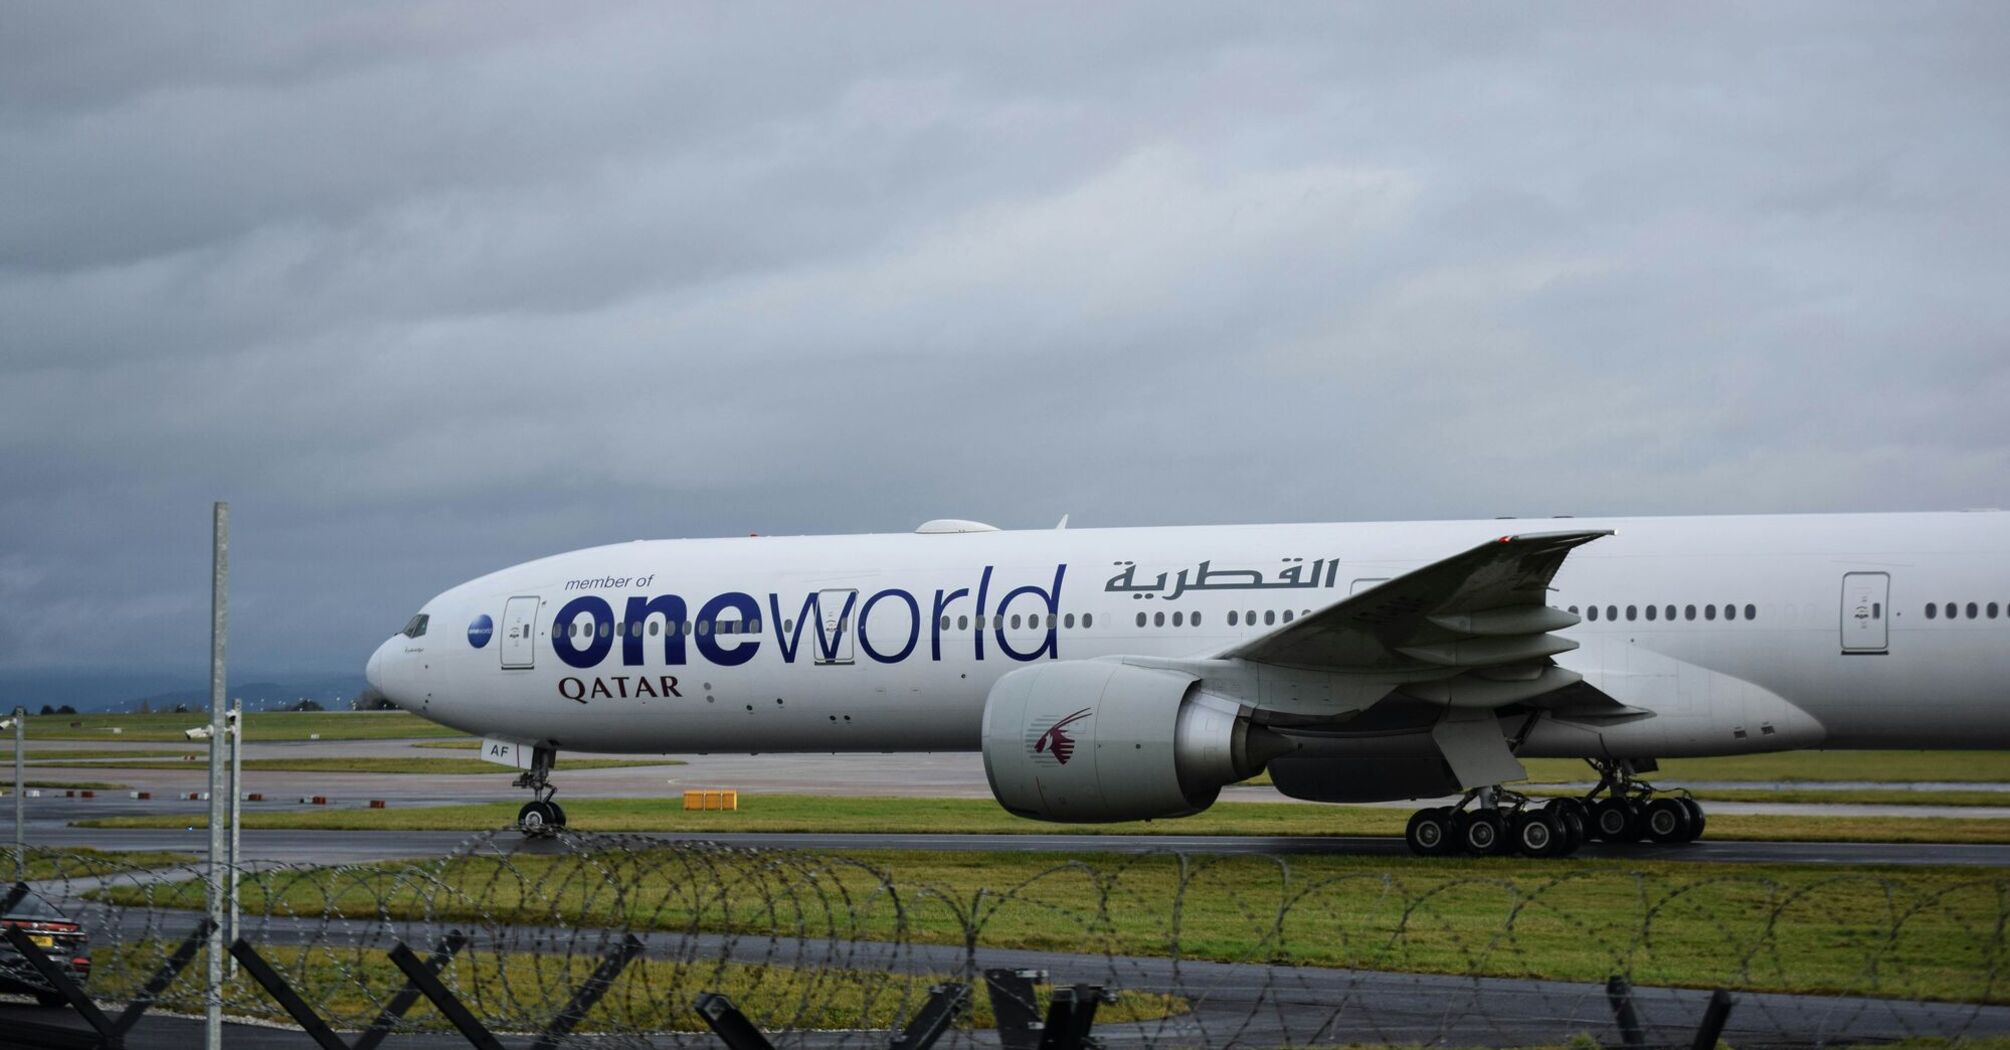 oneworld® alliance aircraft on the runway